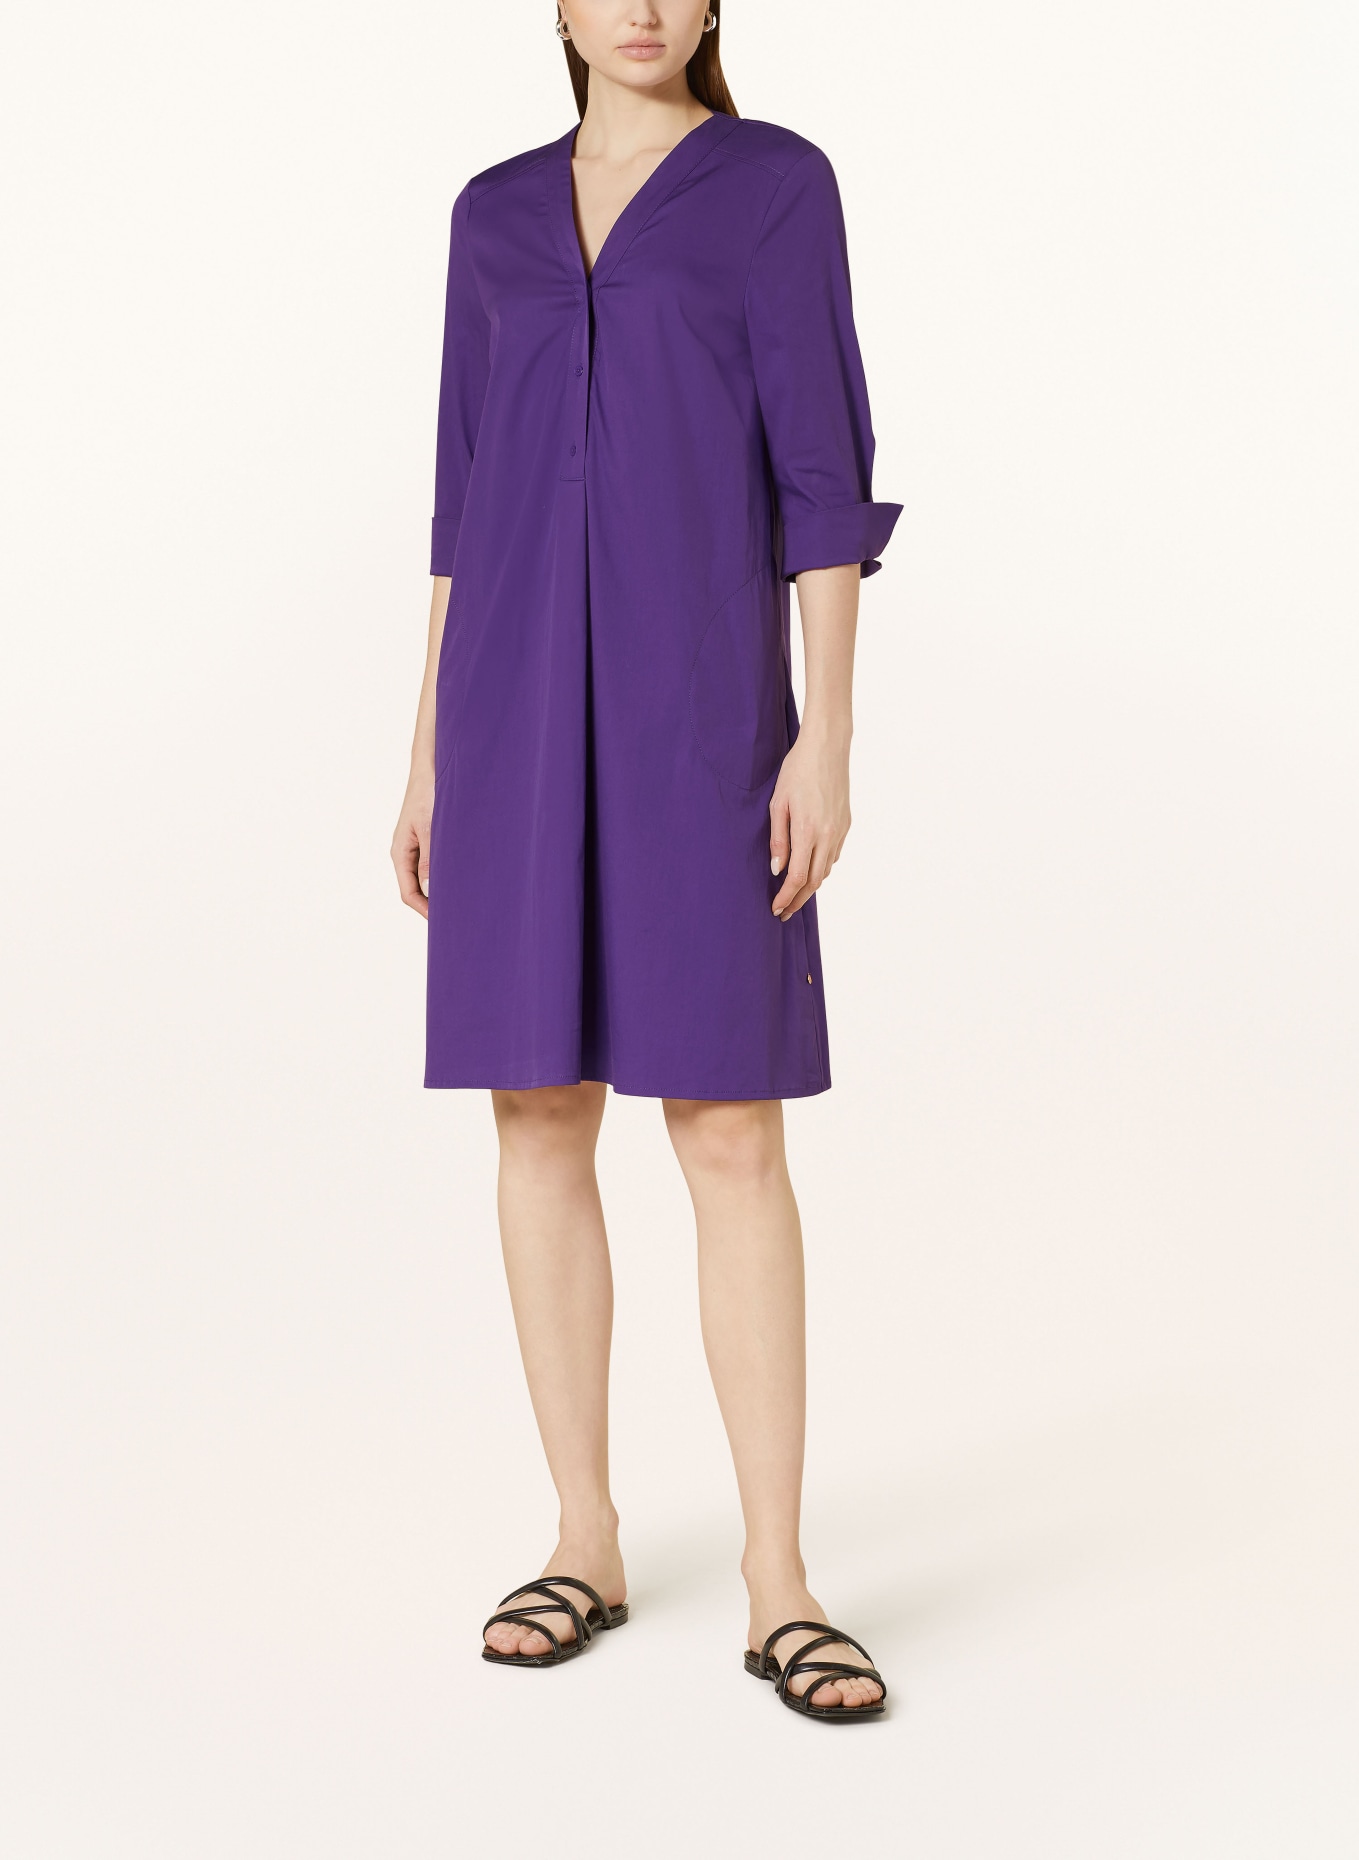 ROBE LÉGÈRE Dress with 3/4 sleeves, Color: PURPLE (Image 2)